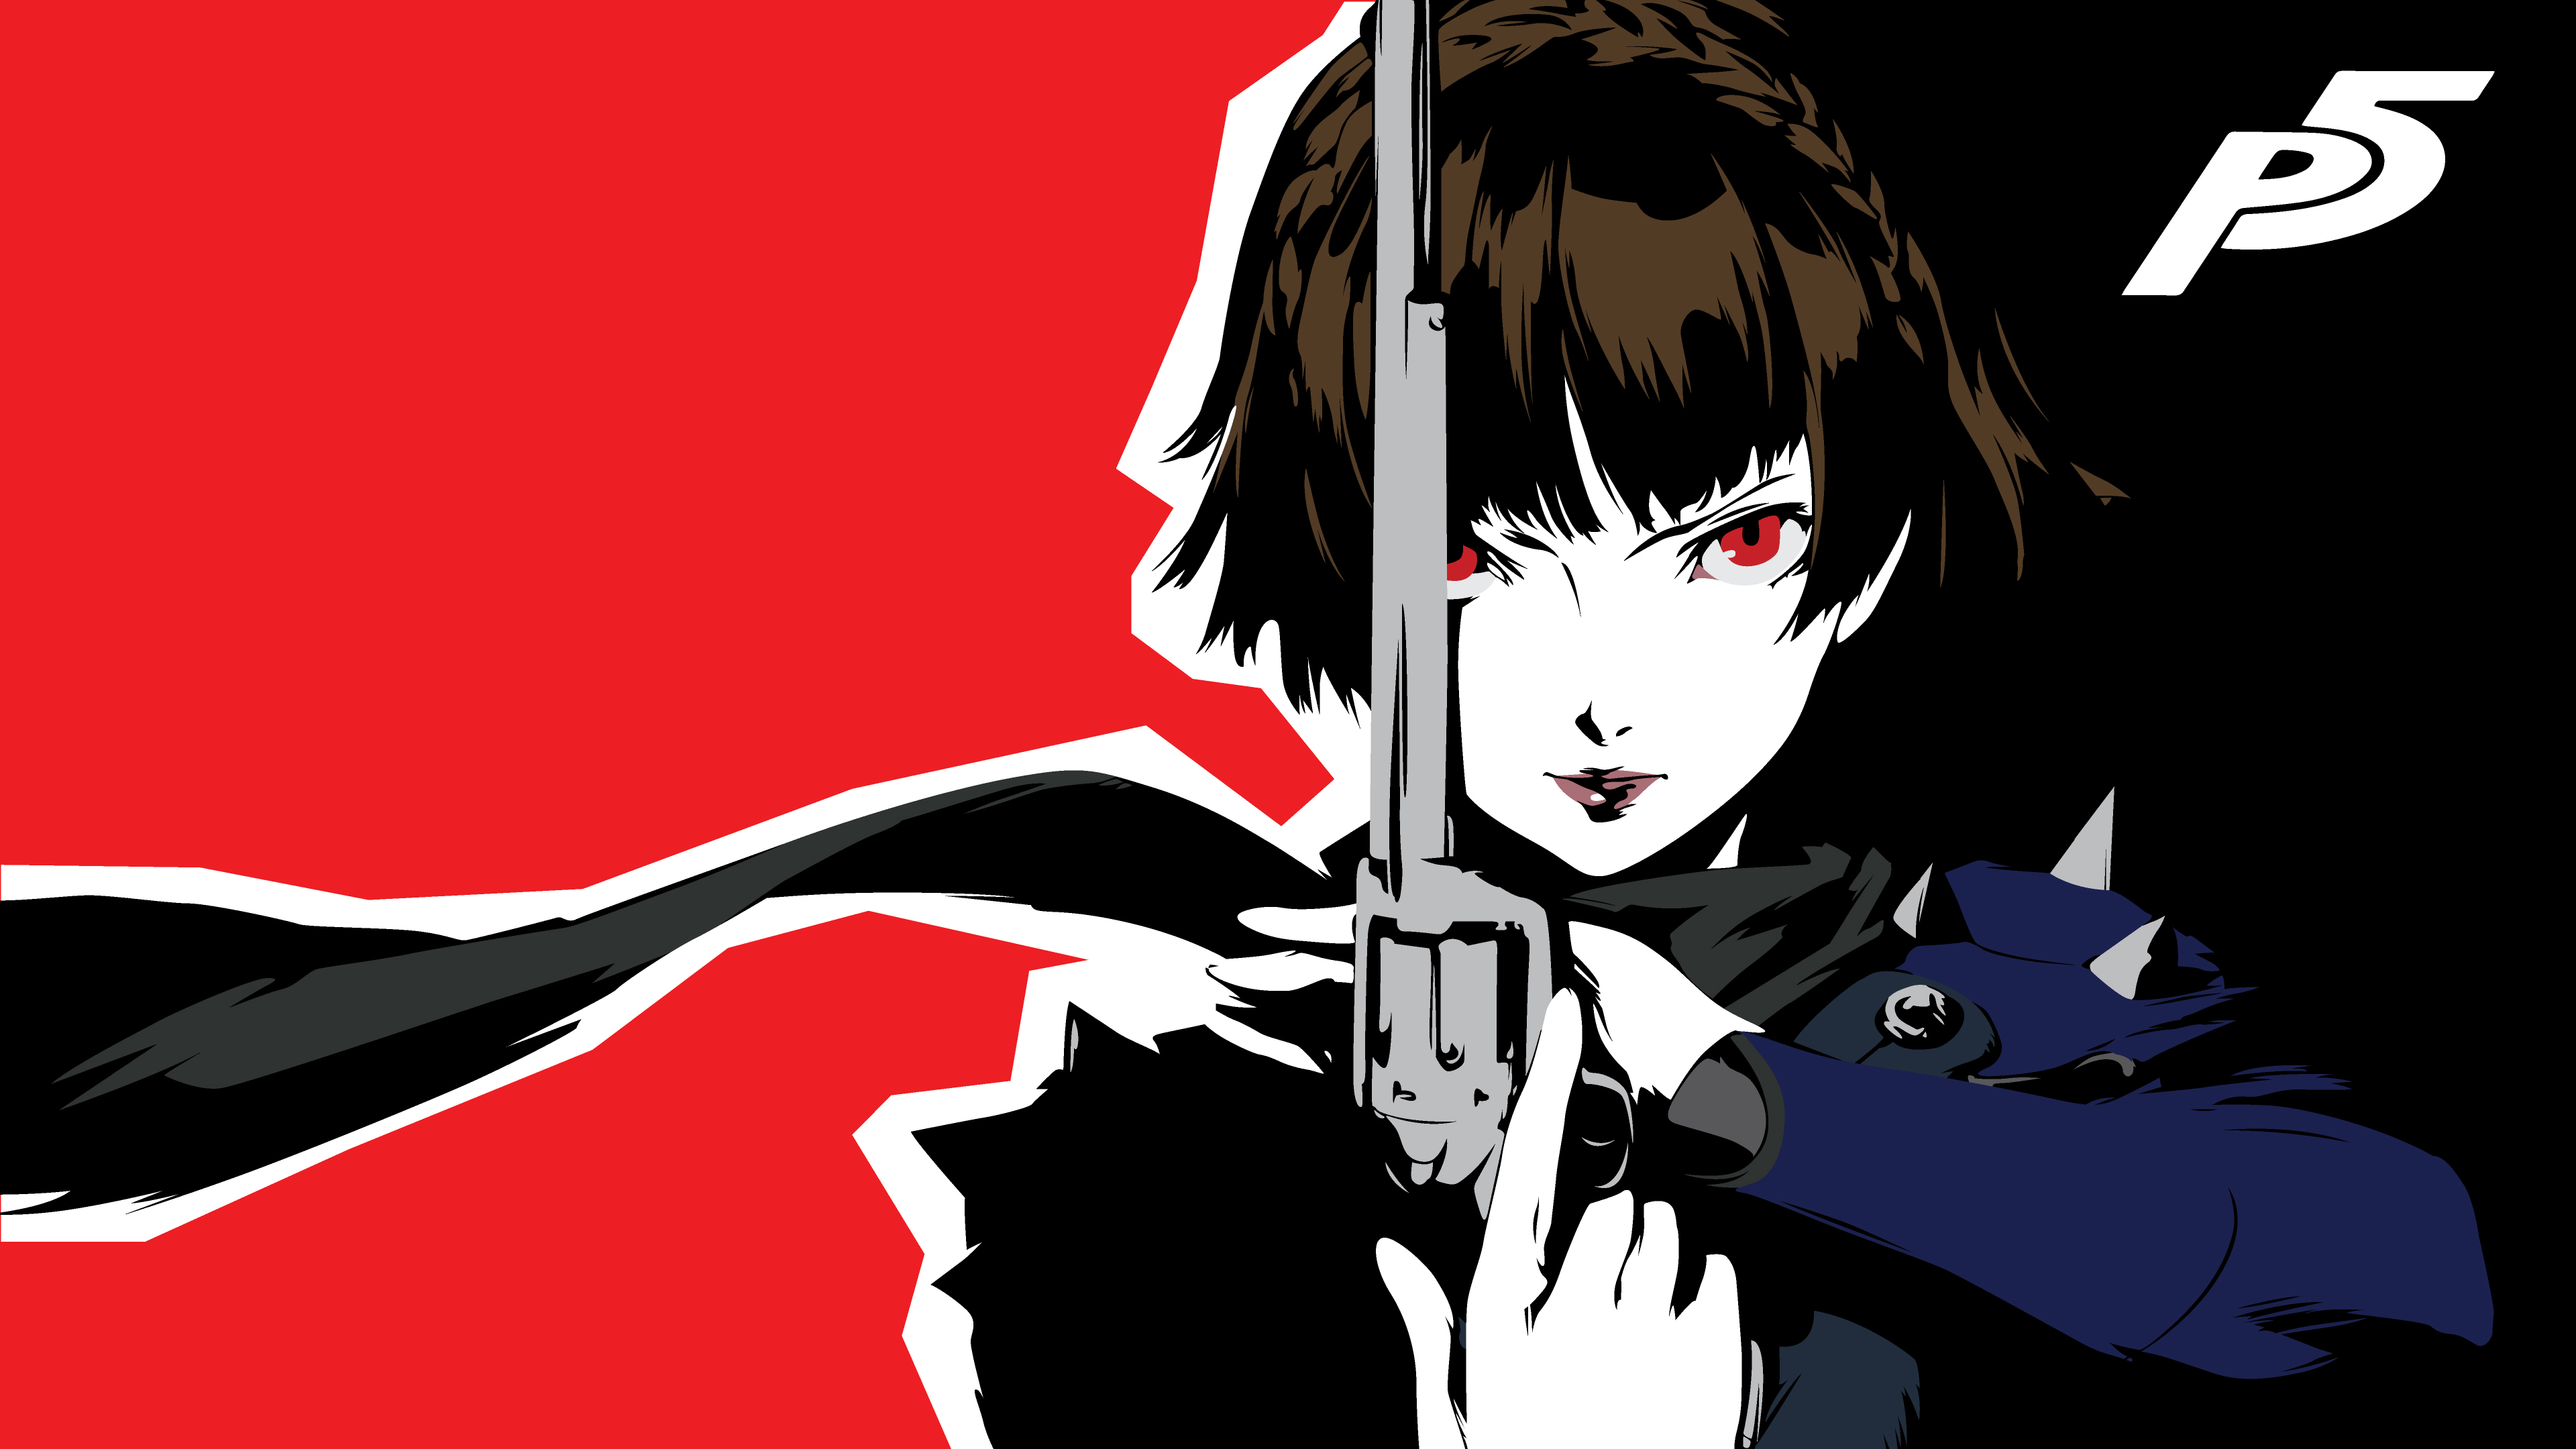 Video Game Persona 5 HD Wallpaper | Background Image